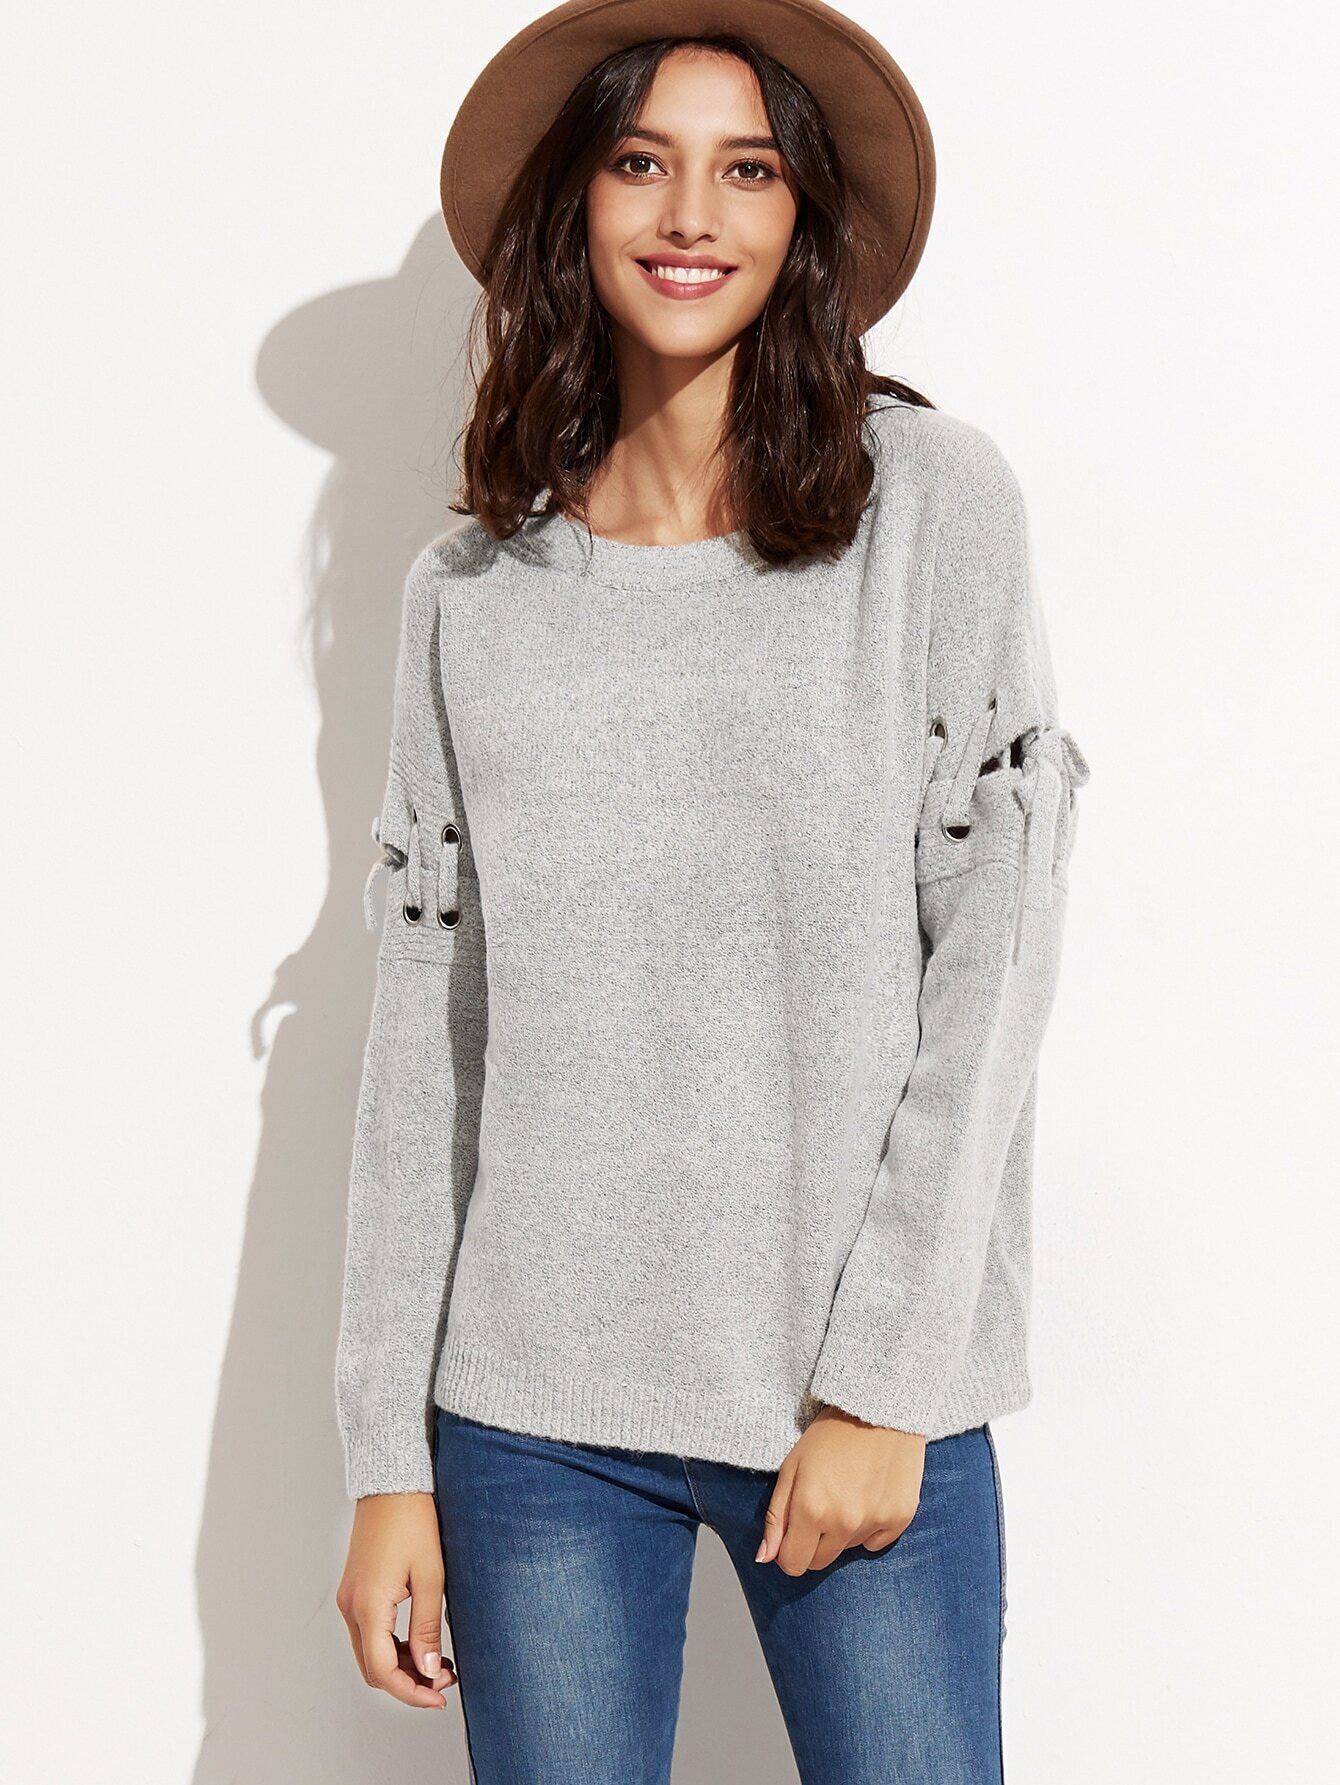 Grey Eyelet Lace Up Sleeve Pullover Sweater | Romwe